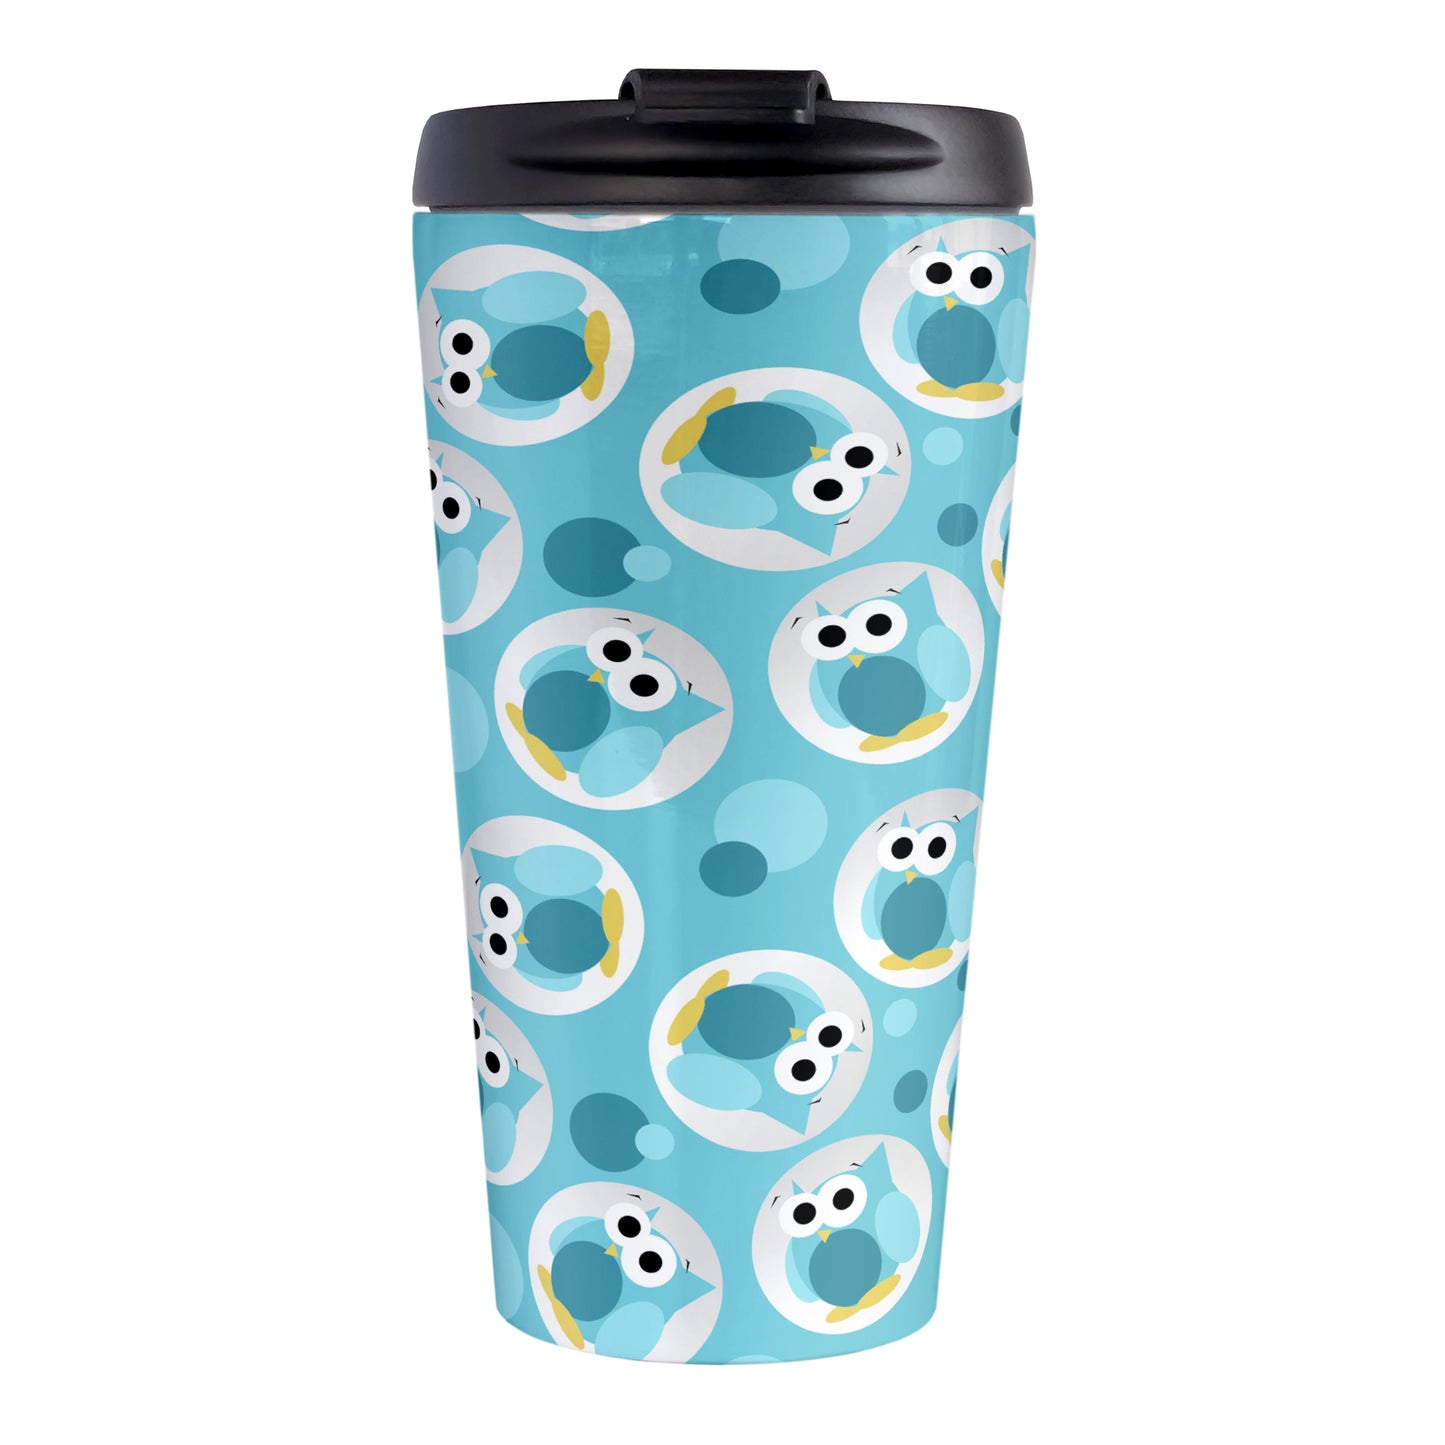 Funny Cute Turquoise Owl Pattern Travel Mug (15oz, stainless steel insulated) at Amy's Coffee Mugs